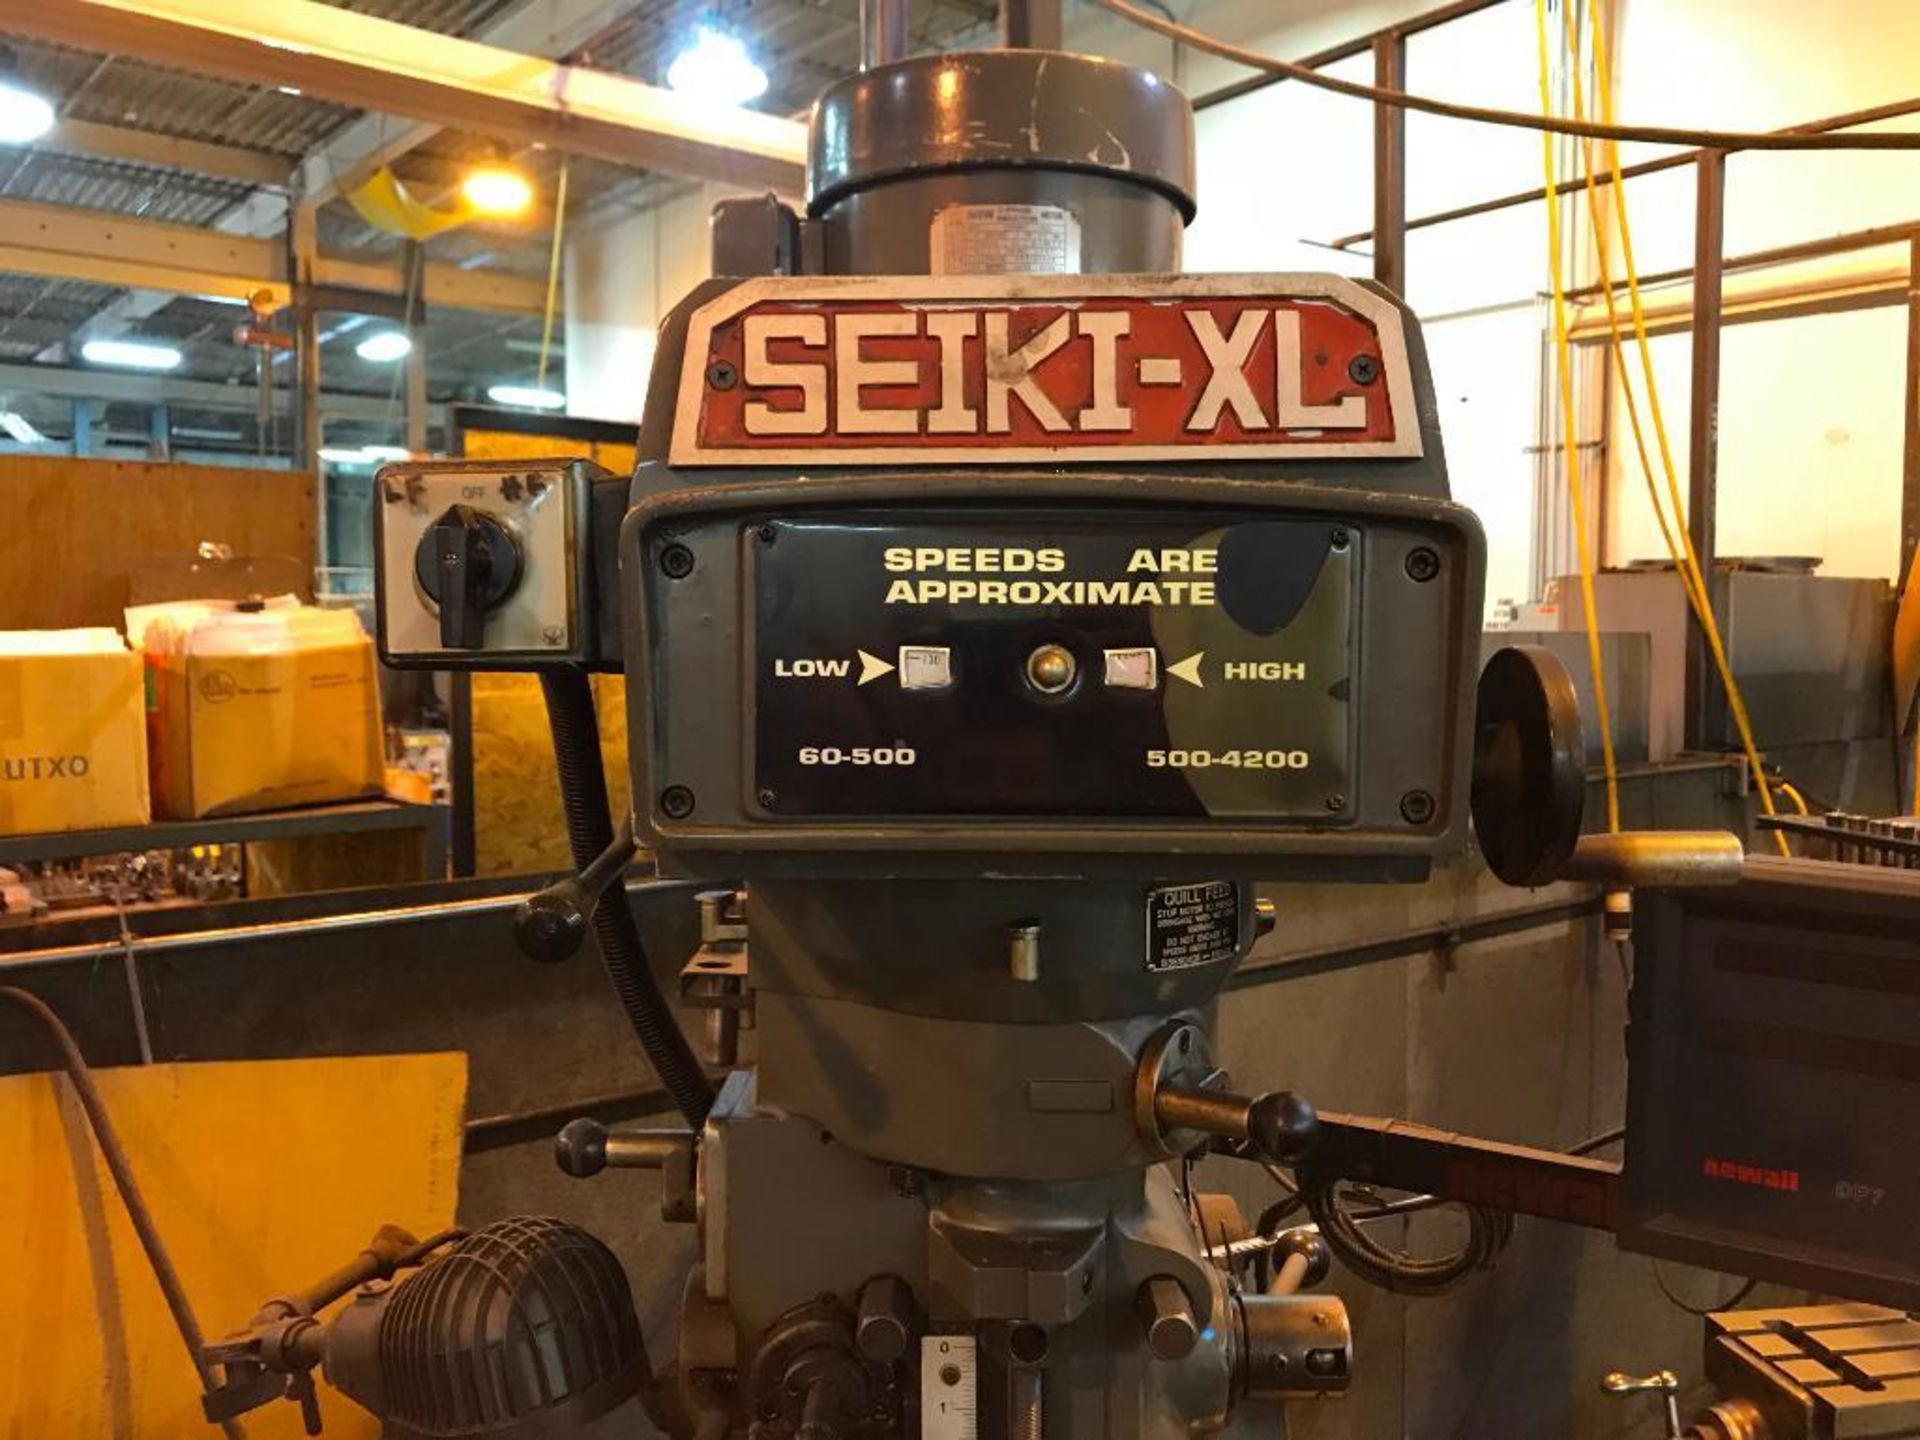 SEIKI XL VERTICAL MILL; MODEL 3VX, NEWALL DPT 2-AXIS DRO, 50'' X 10'' TABLE, 60-4200 RPM, KNEE BED - Image 5 of 6